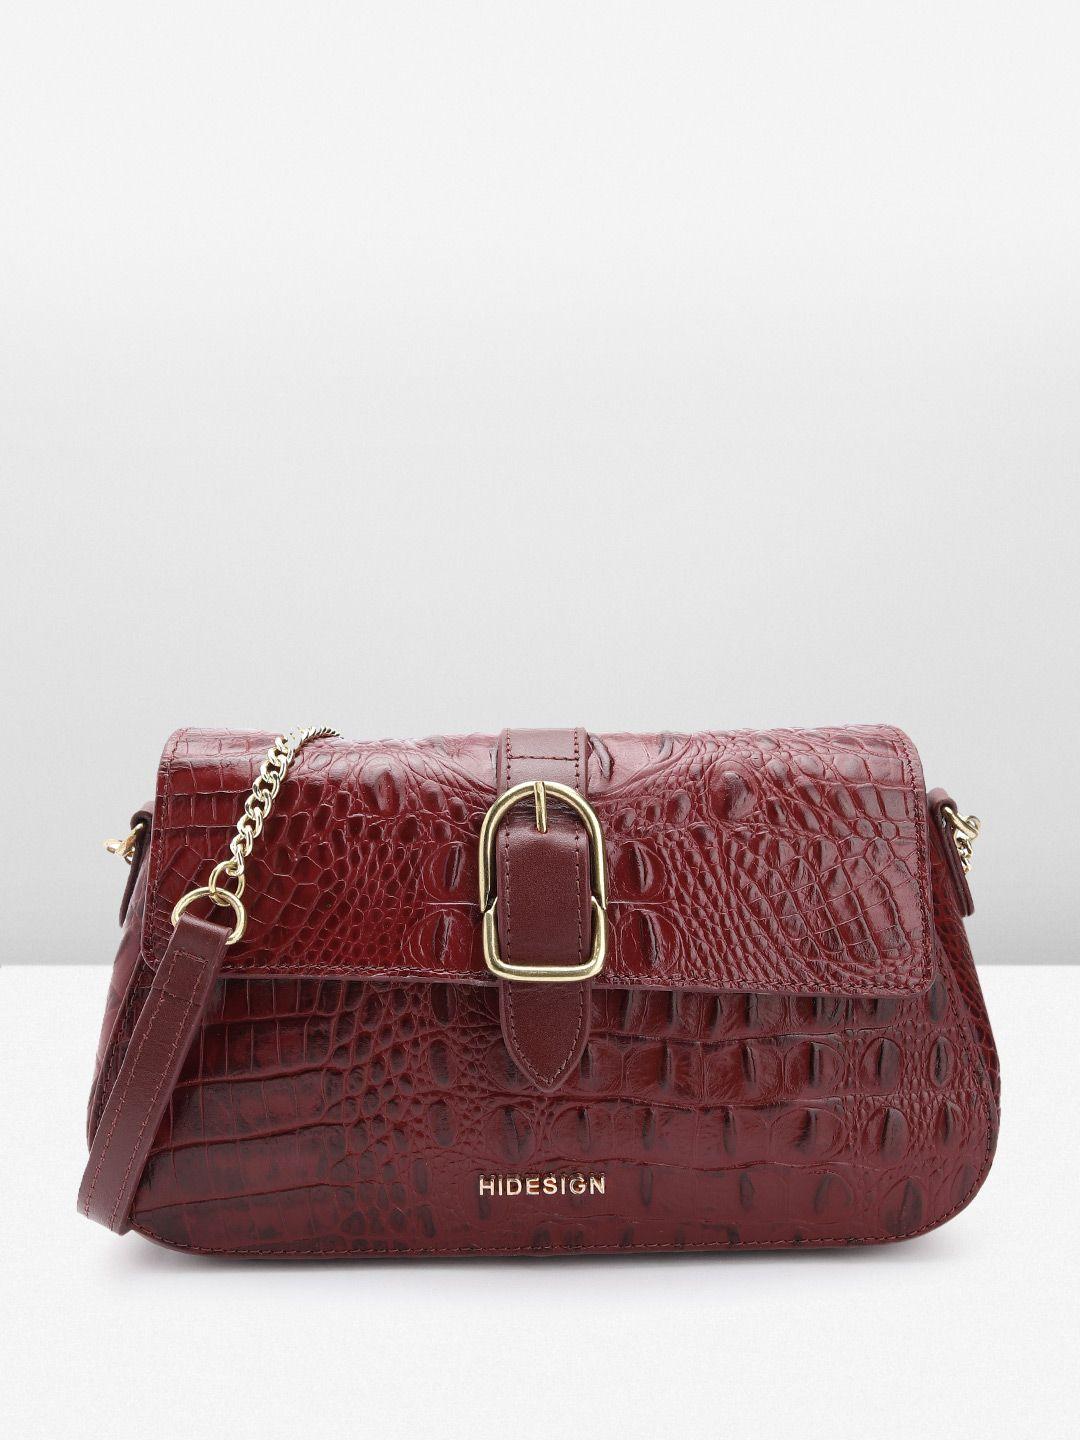 hidesign-croc-textured-leather-structured-sling-bag-with-buckle-detail